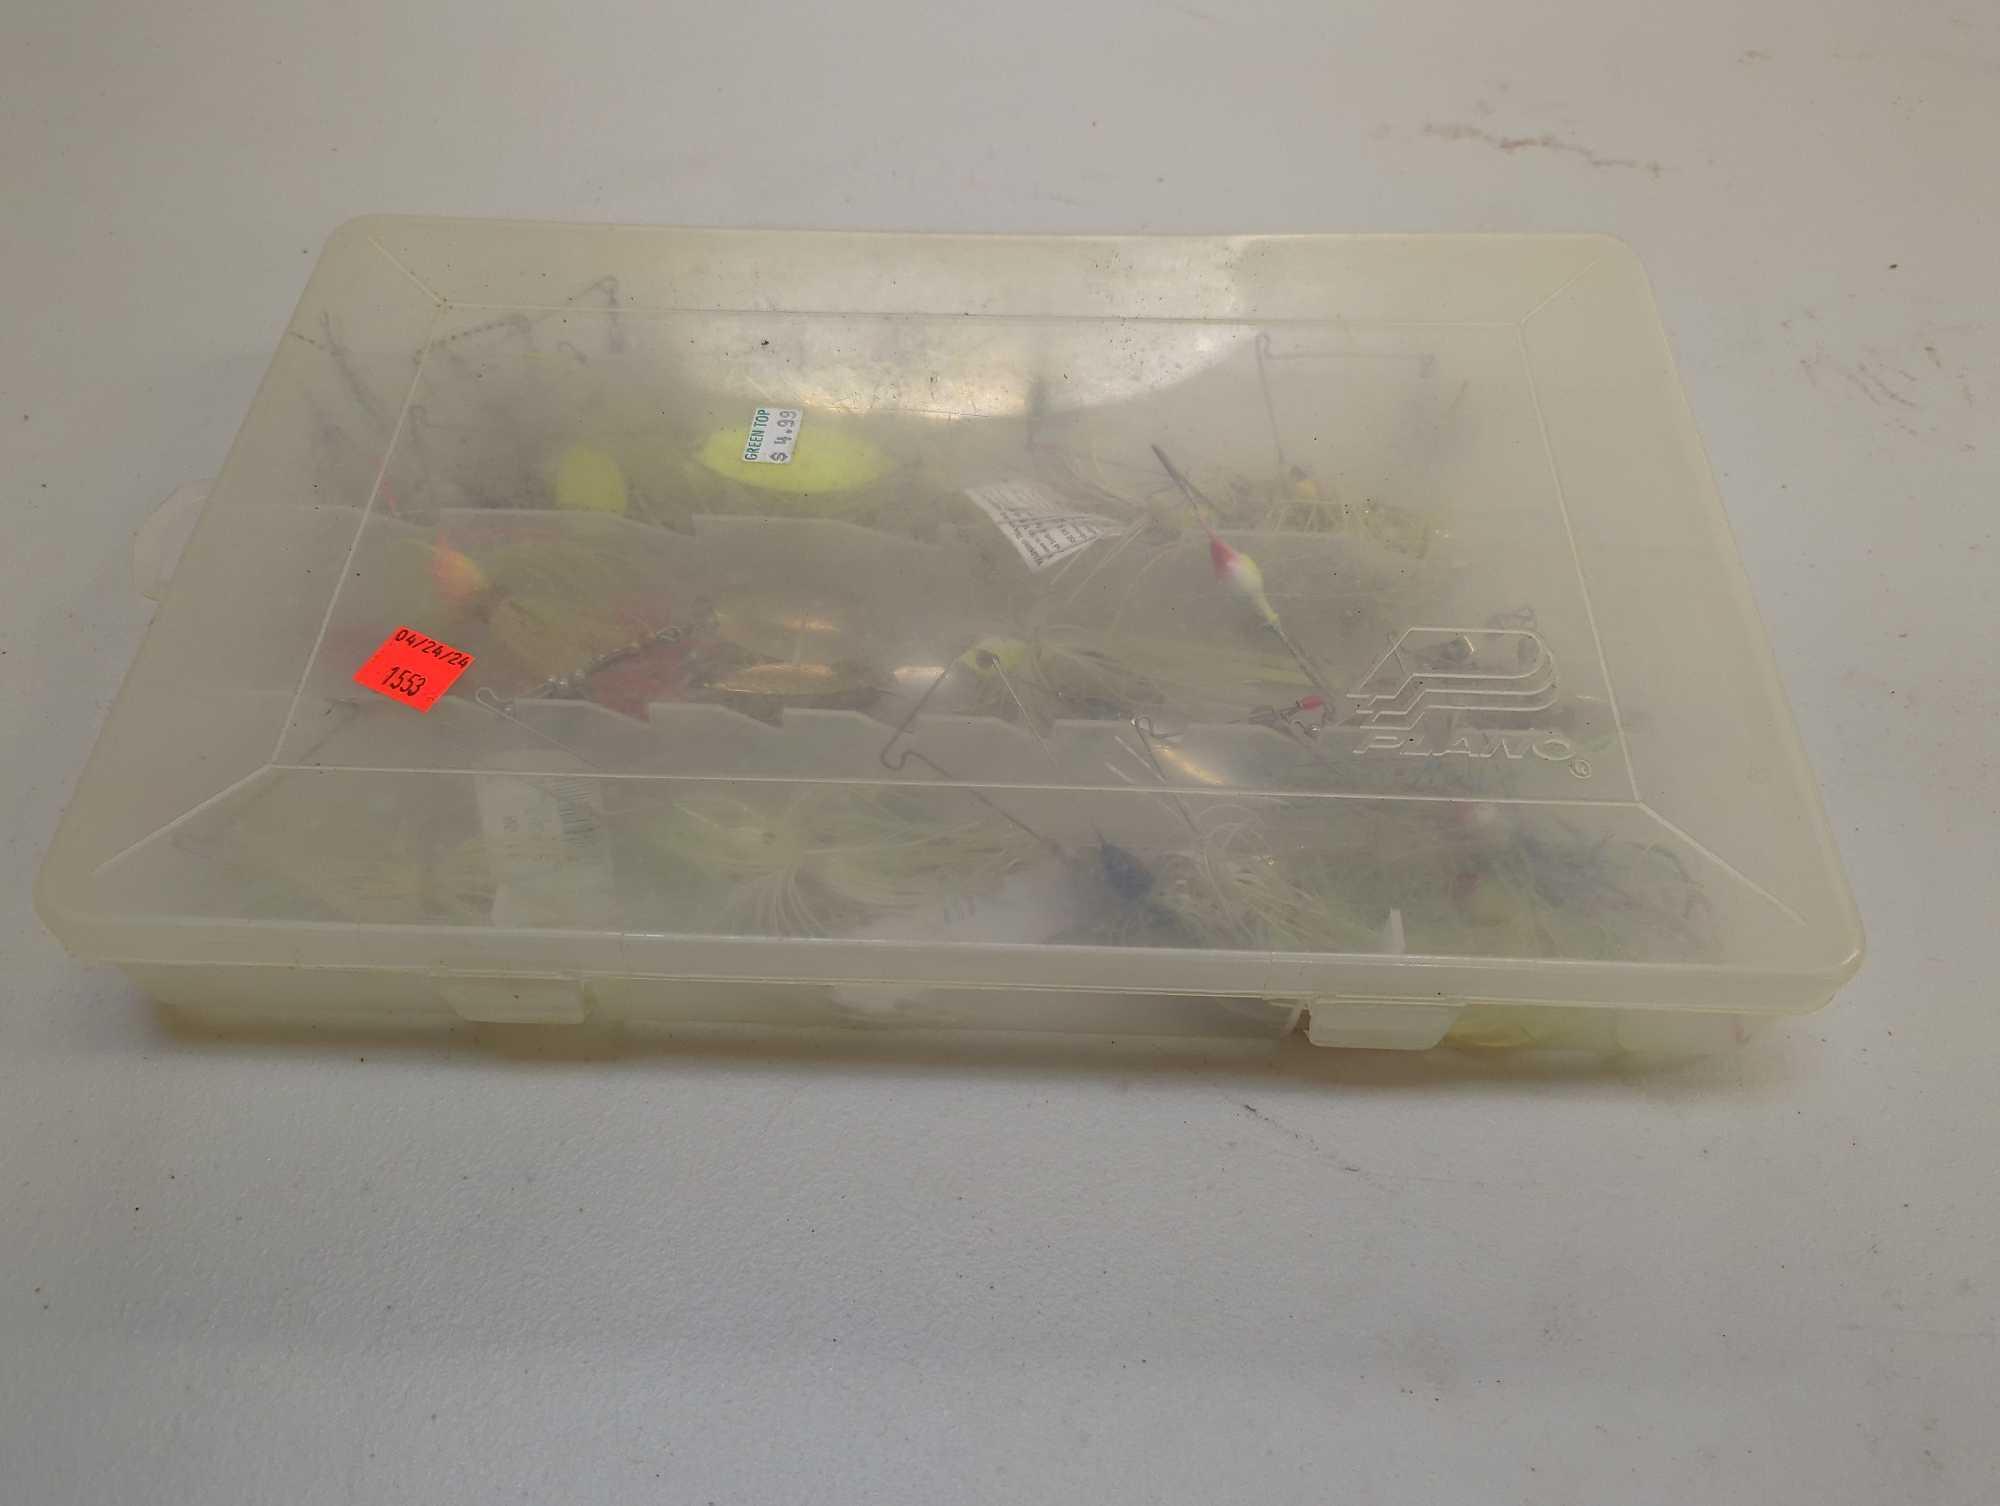 Tackle Box and contents including various fishing lures of similar style. Comes as is shown in